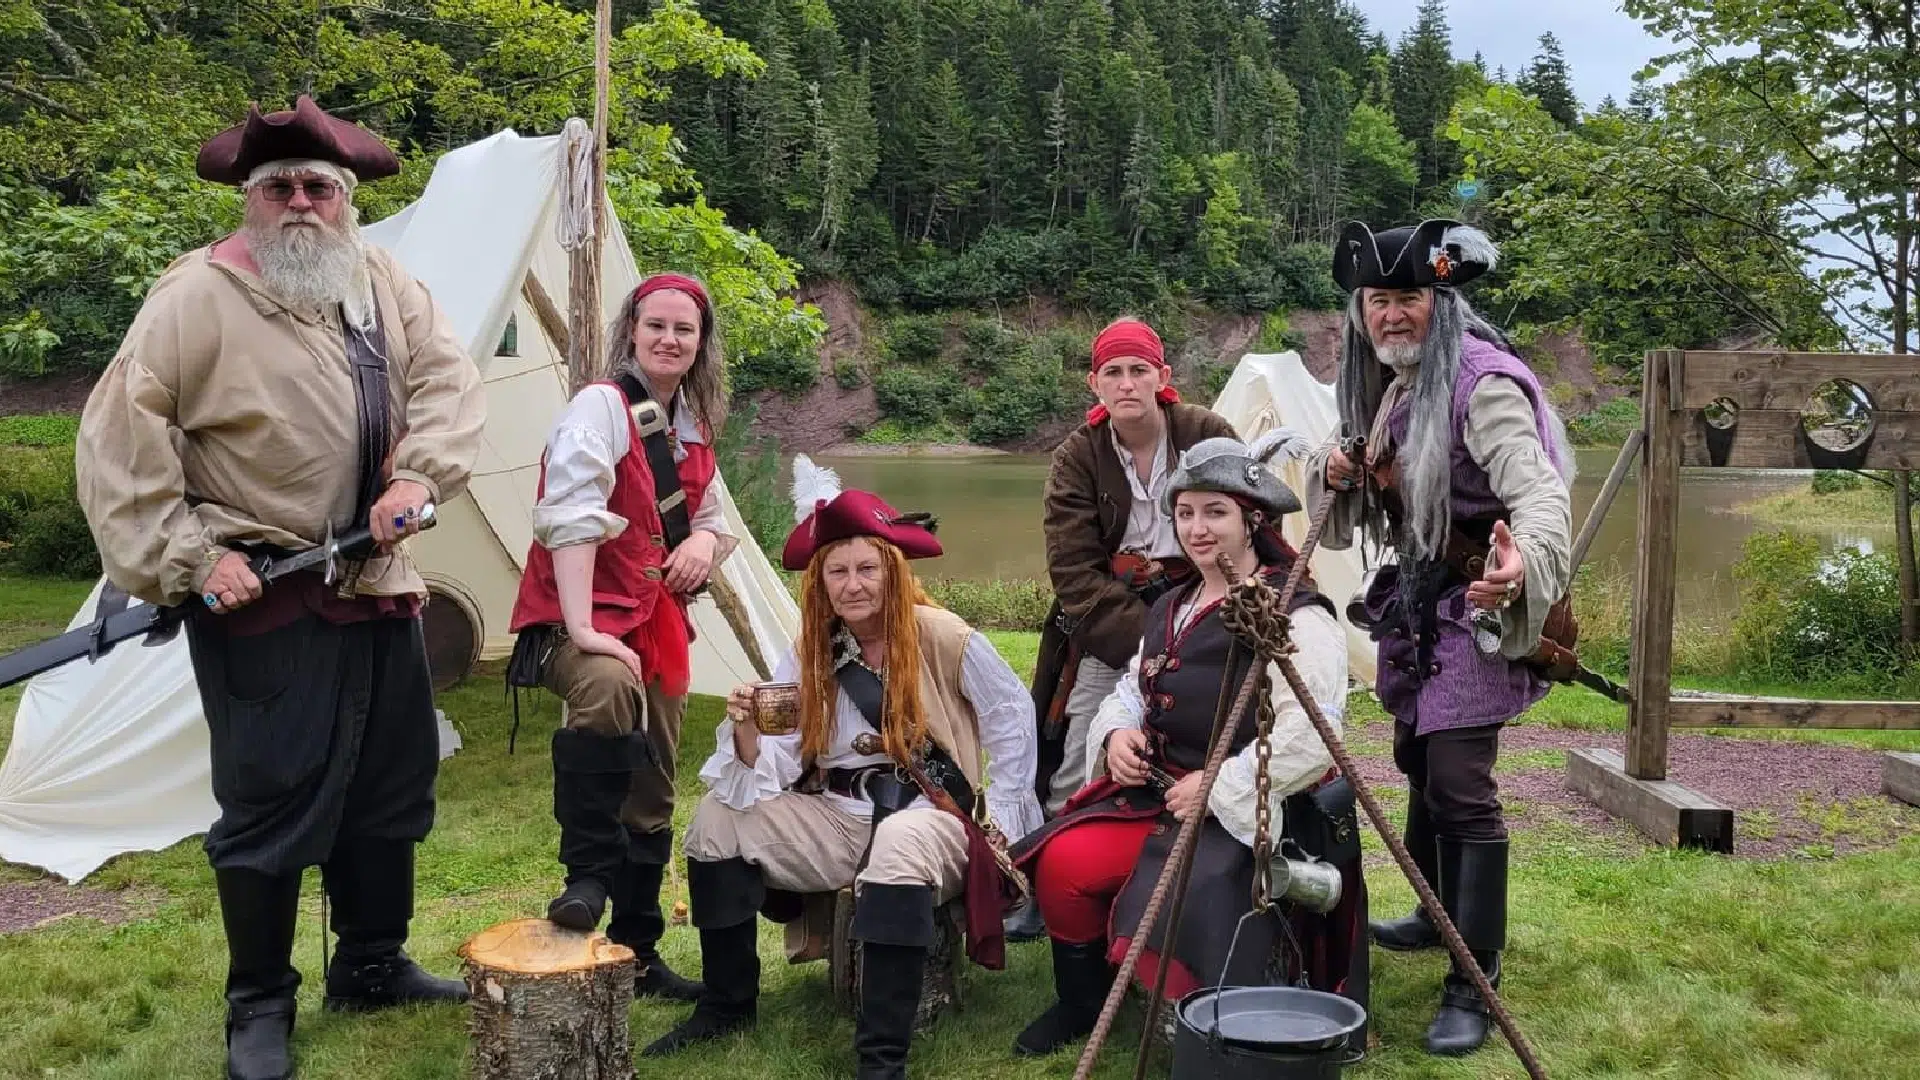 Fundy Sea Shanty Festival returns for 2nd year